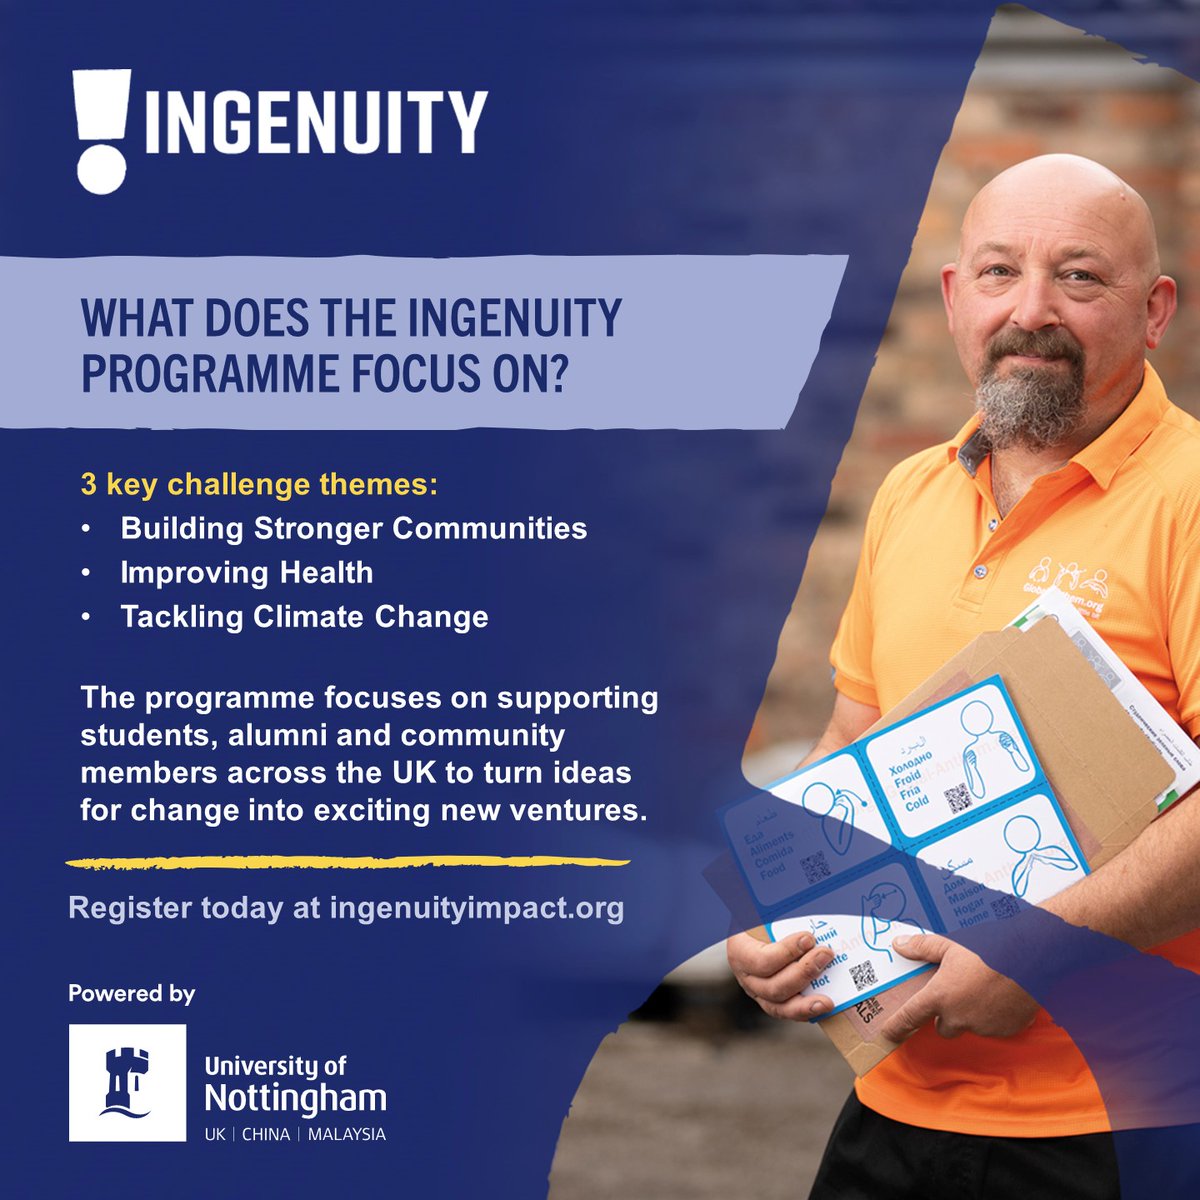 Are you sitting on an idea that could help the UK’s major social, health and environmental challenges? @IngenuityImpact can help turn your ideas for change into reality. The most impactful ideas are awarded top prizes and receive a share of £75,000. ⬇ ingenuityimpact.org